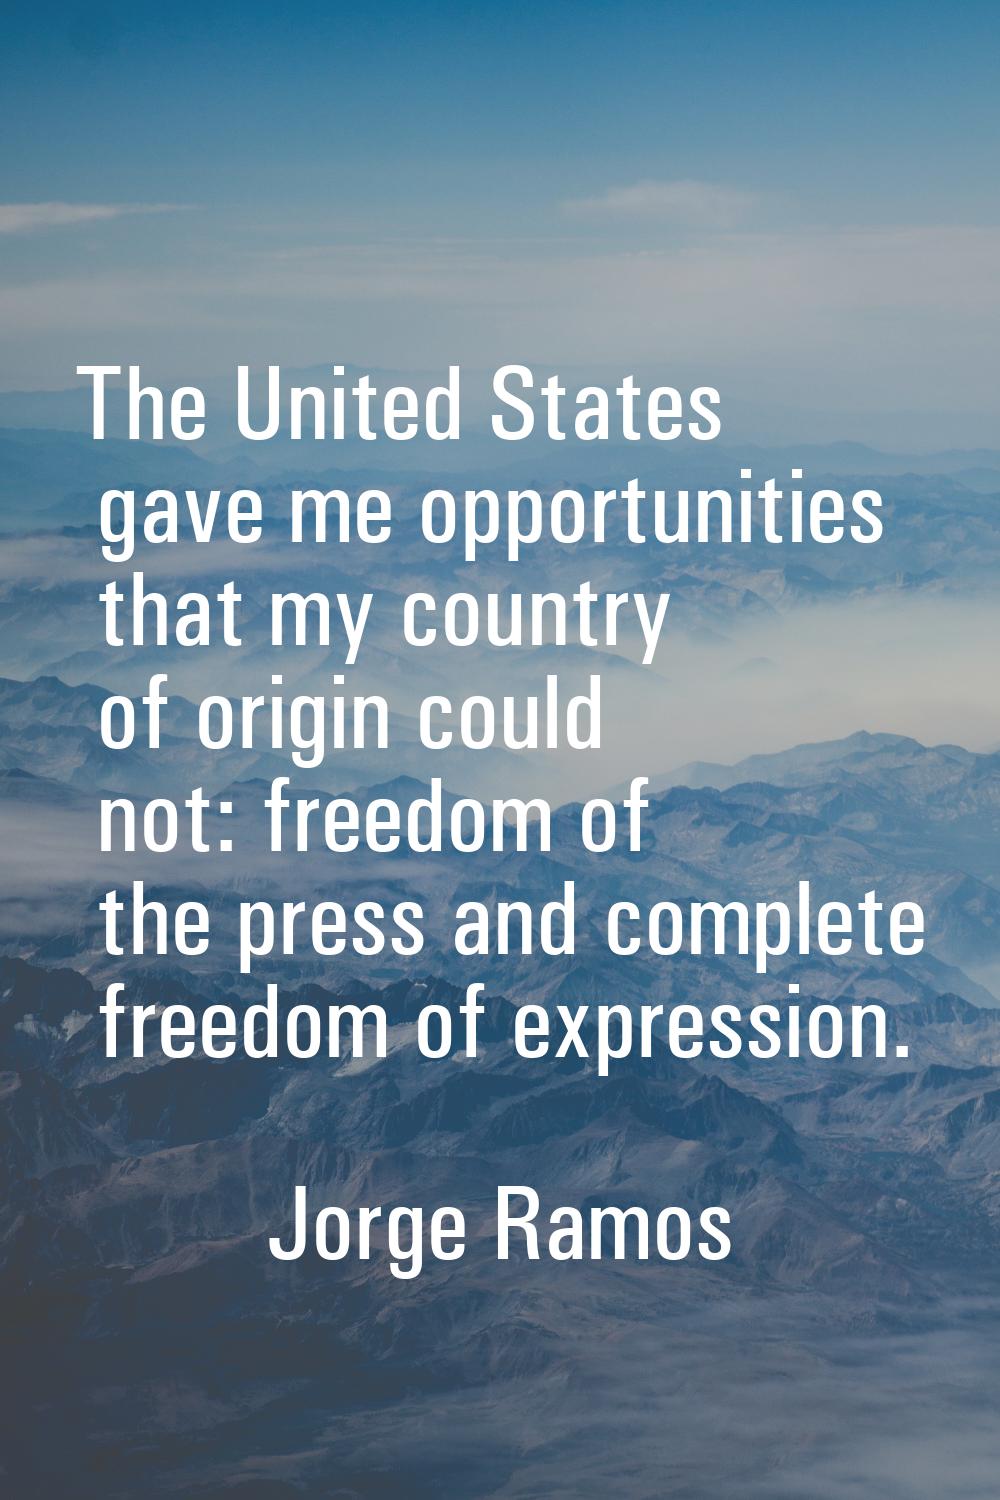 The United States gave me opportunities that my country of origin could not: freedom of the press a